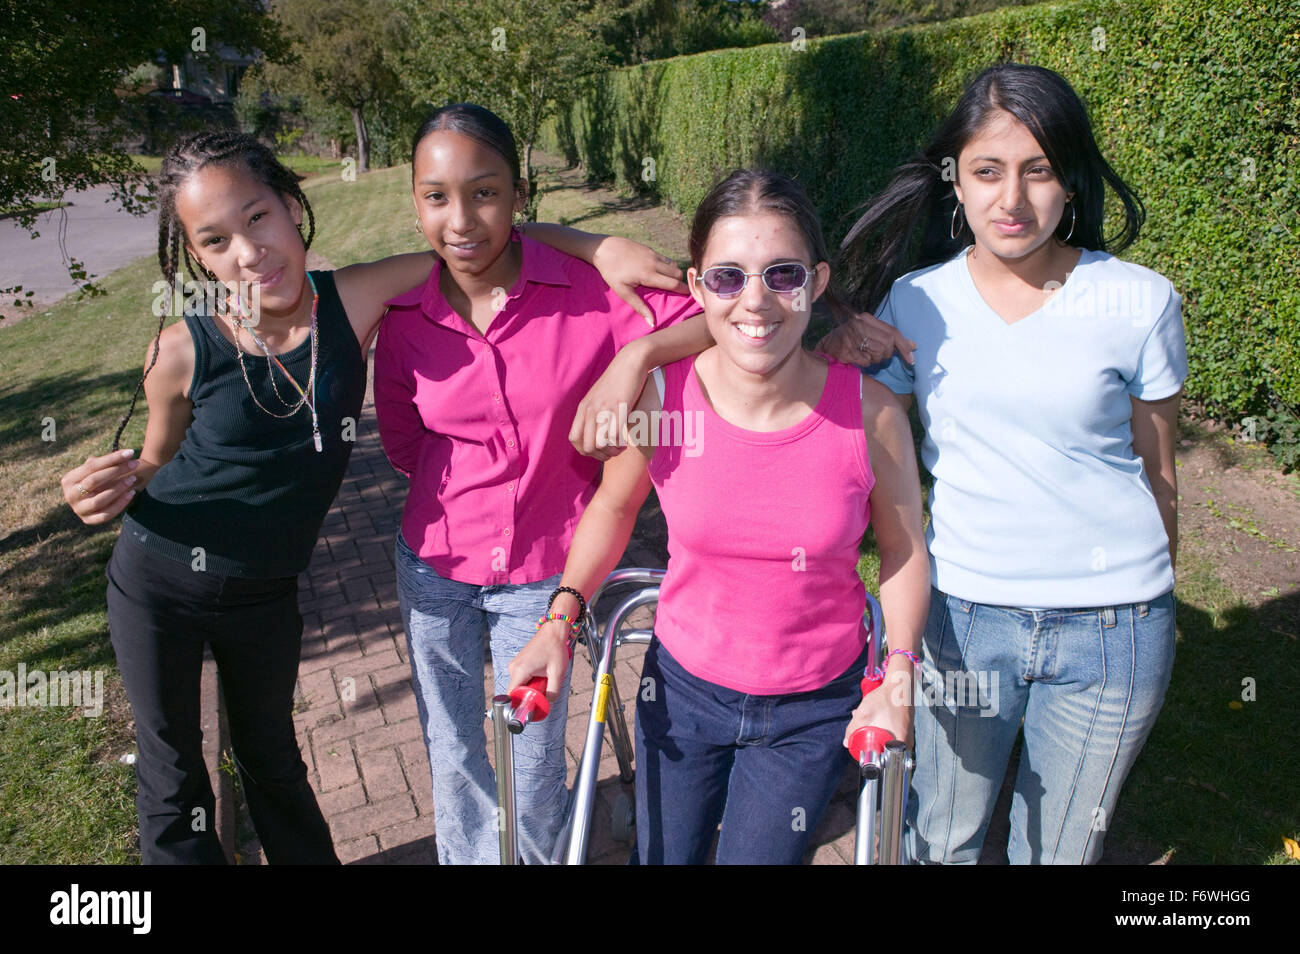 Group of teenaged friends out in the park together, Stock Photo